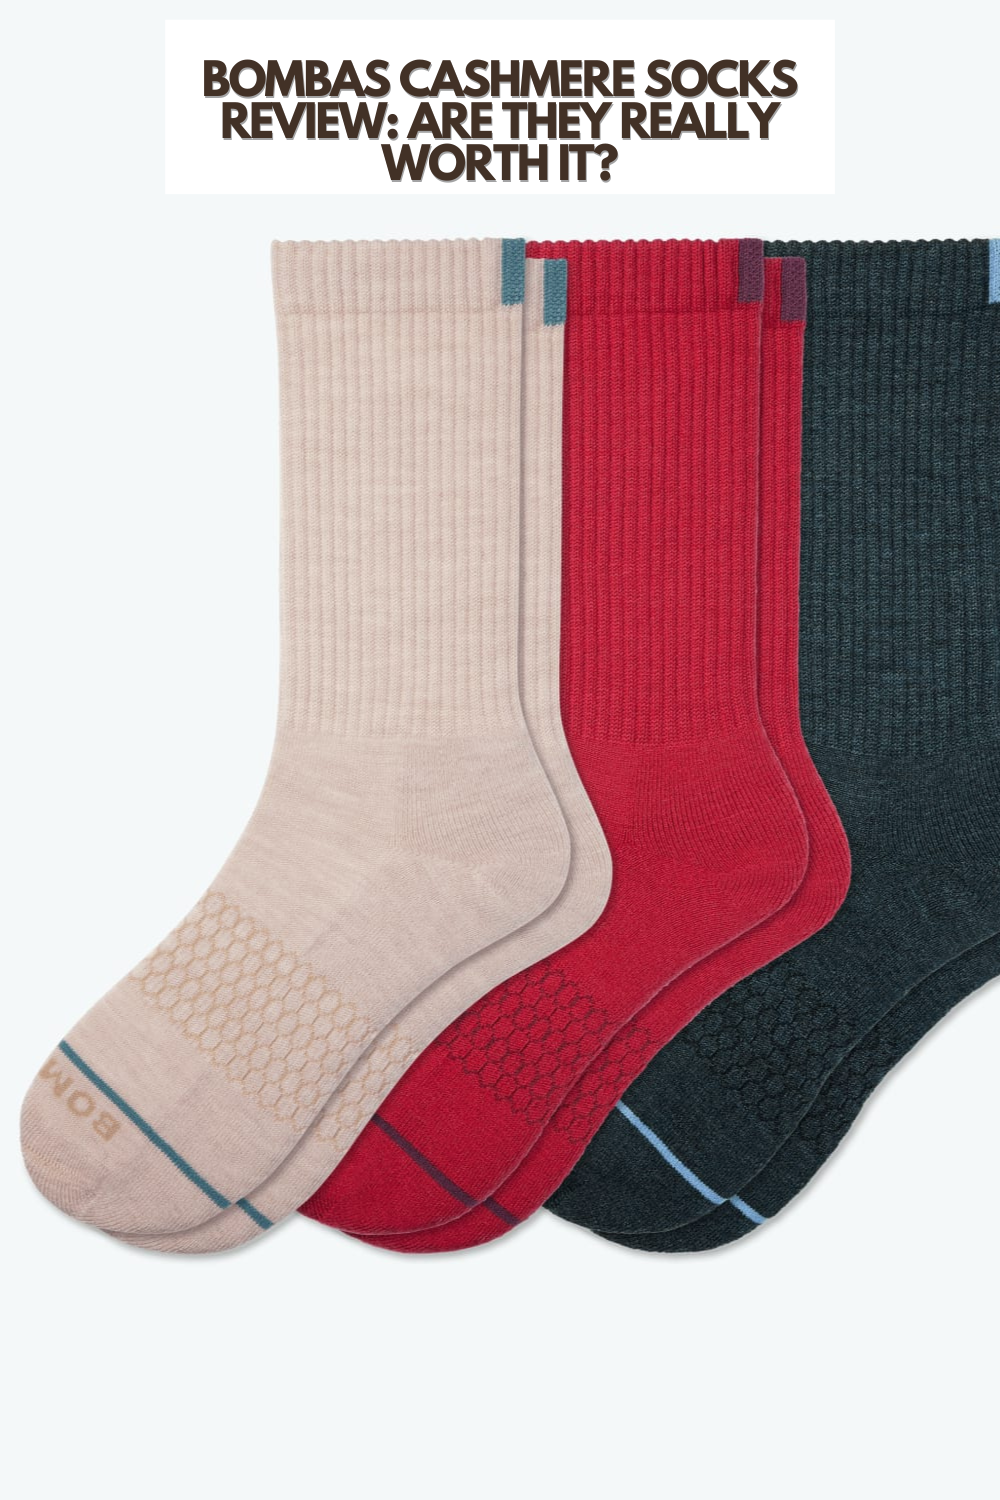 https://www.itsmeladyg.com/wp-content/uploads/2023/11/Bombas-Cashmere-Socks-Review-Are-they-really-worth-it.png